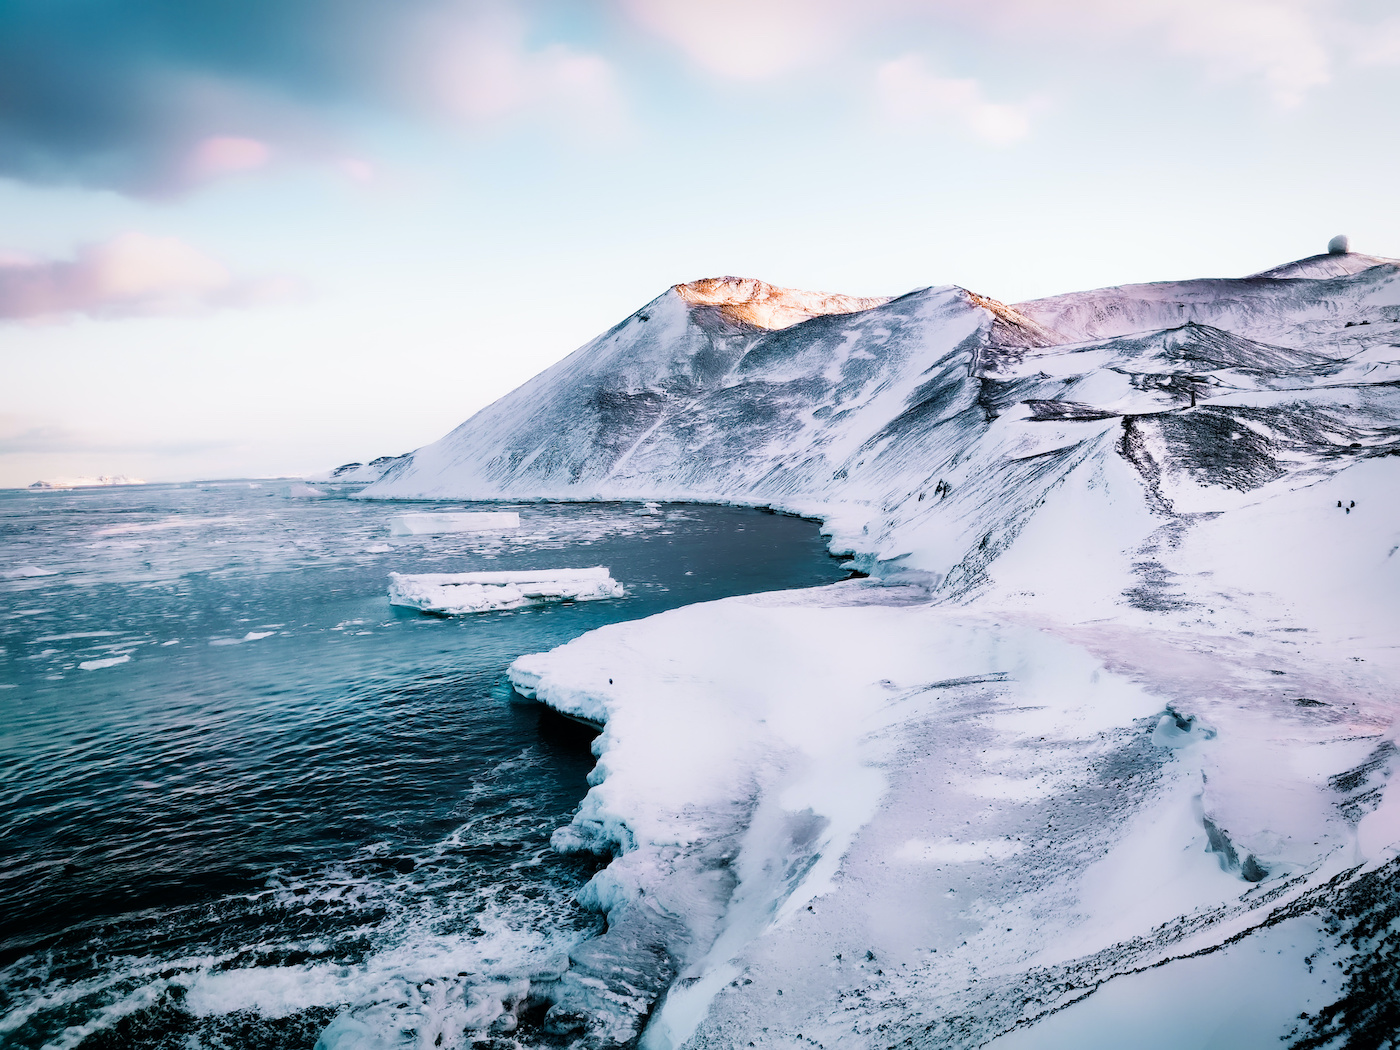 snowy hills with views of the frozen waters and icebergs at Ross Island, by McMurdo Station Antarctica